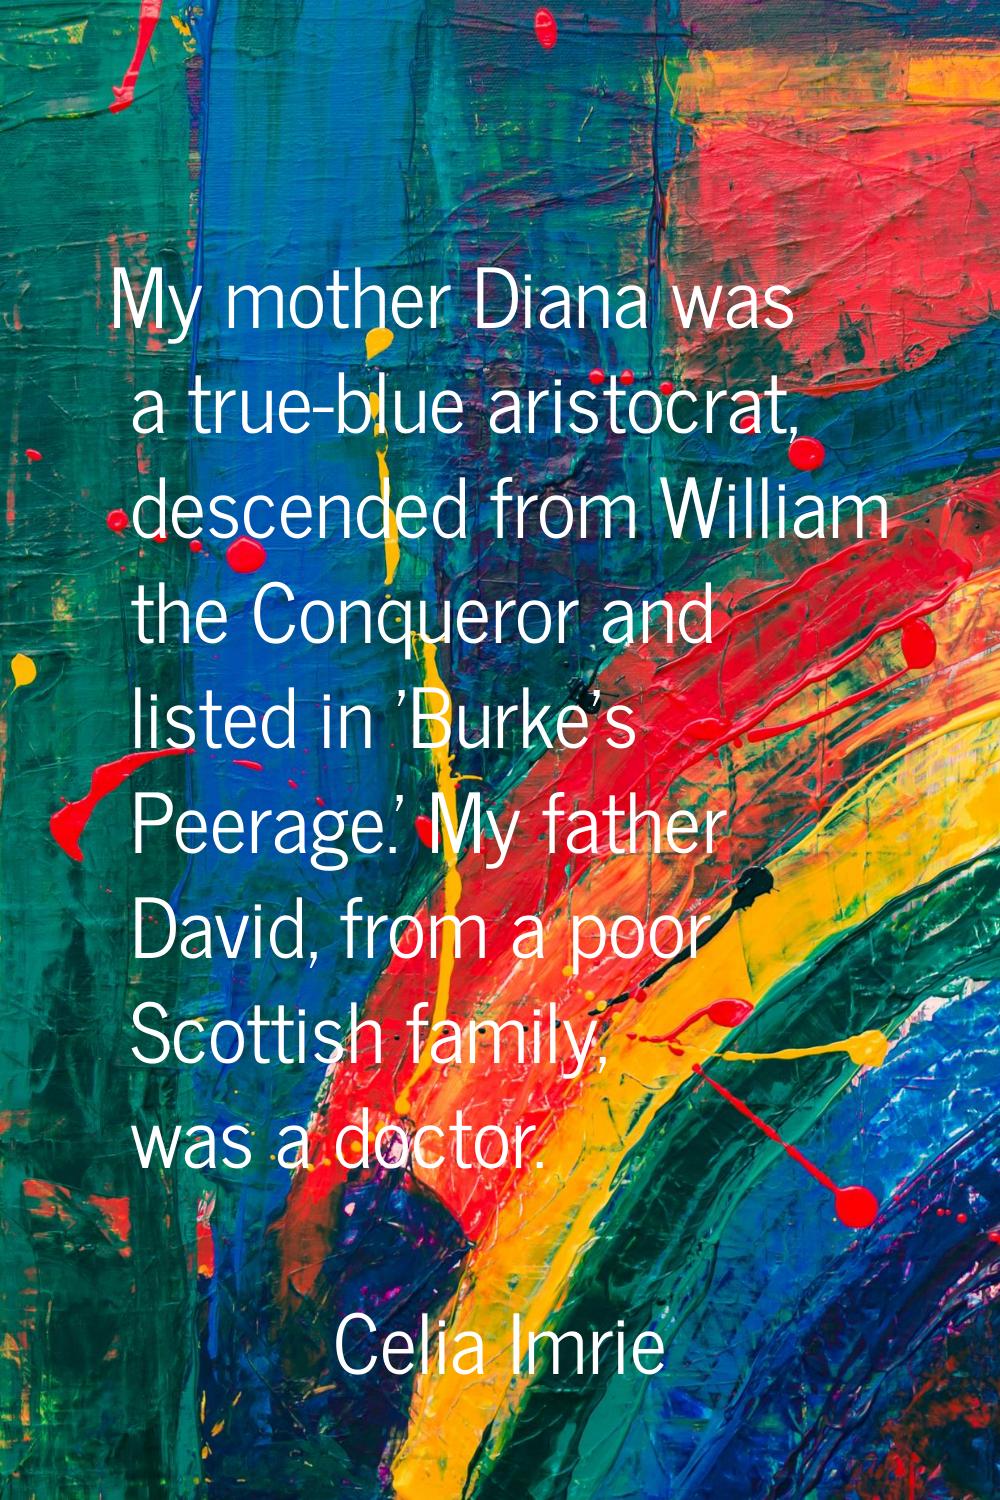 My mother Diana was a true-blue aristocrat, descended from William the Conqueror and listed in 'Bur